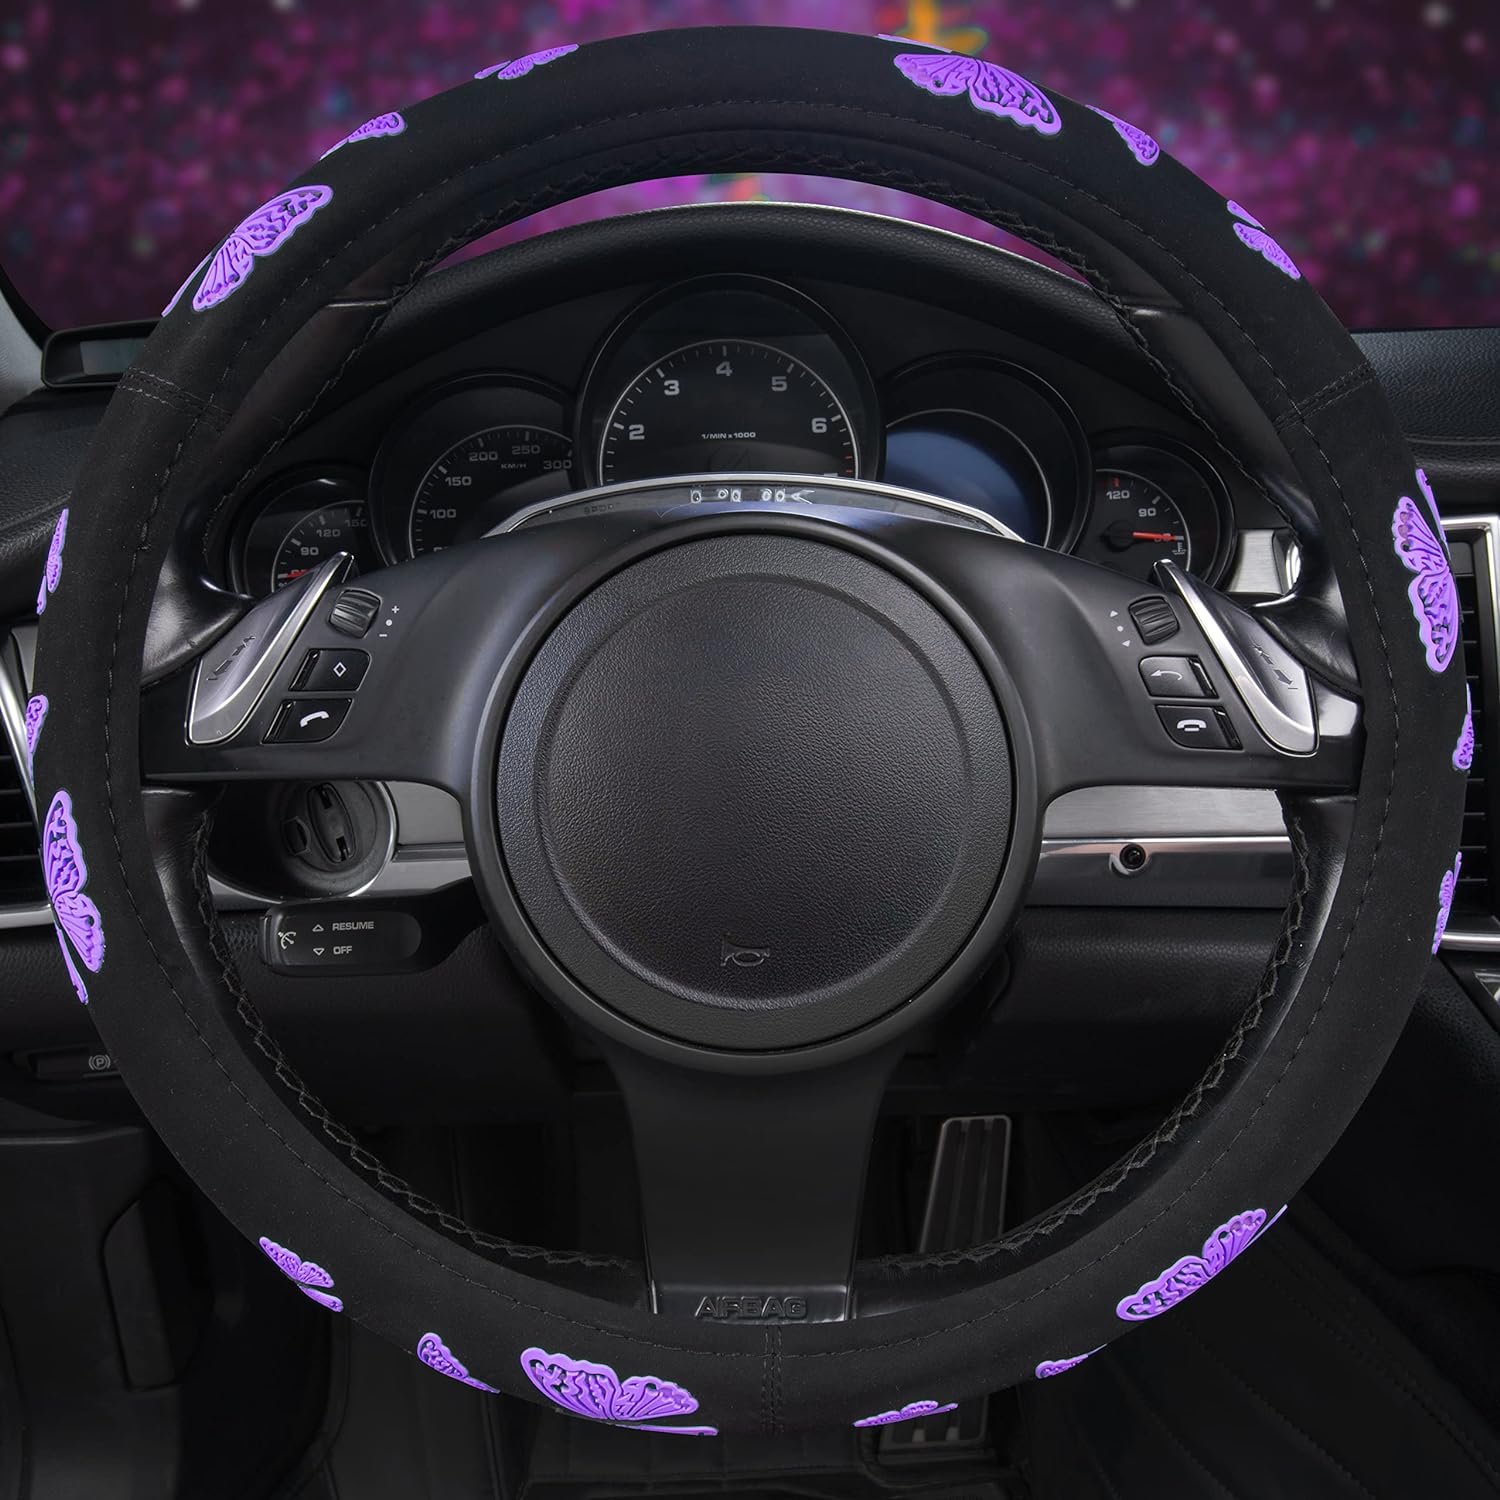 Car Pass Purple Butterfly Steering Wheel Cover, Universal Fit for Suvs, Trucks, Sedans, Cars for Cute Women Girly (Black and Purple)